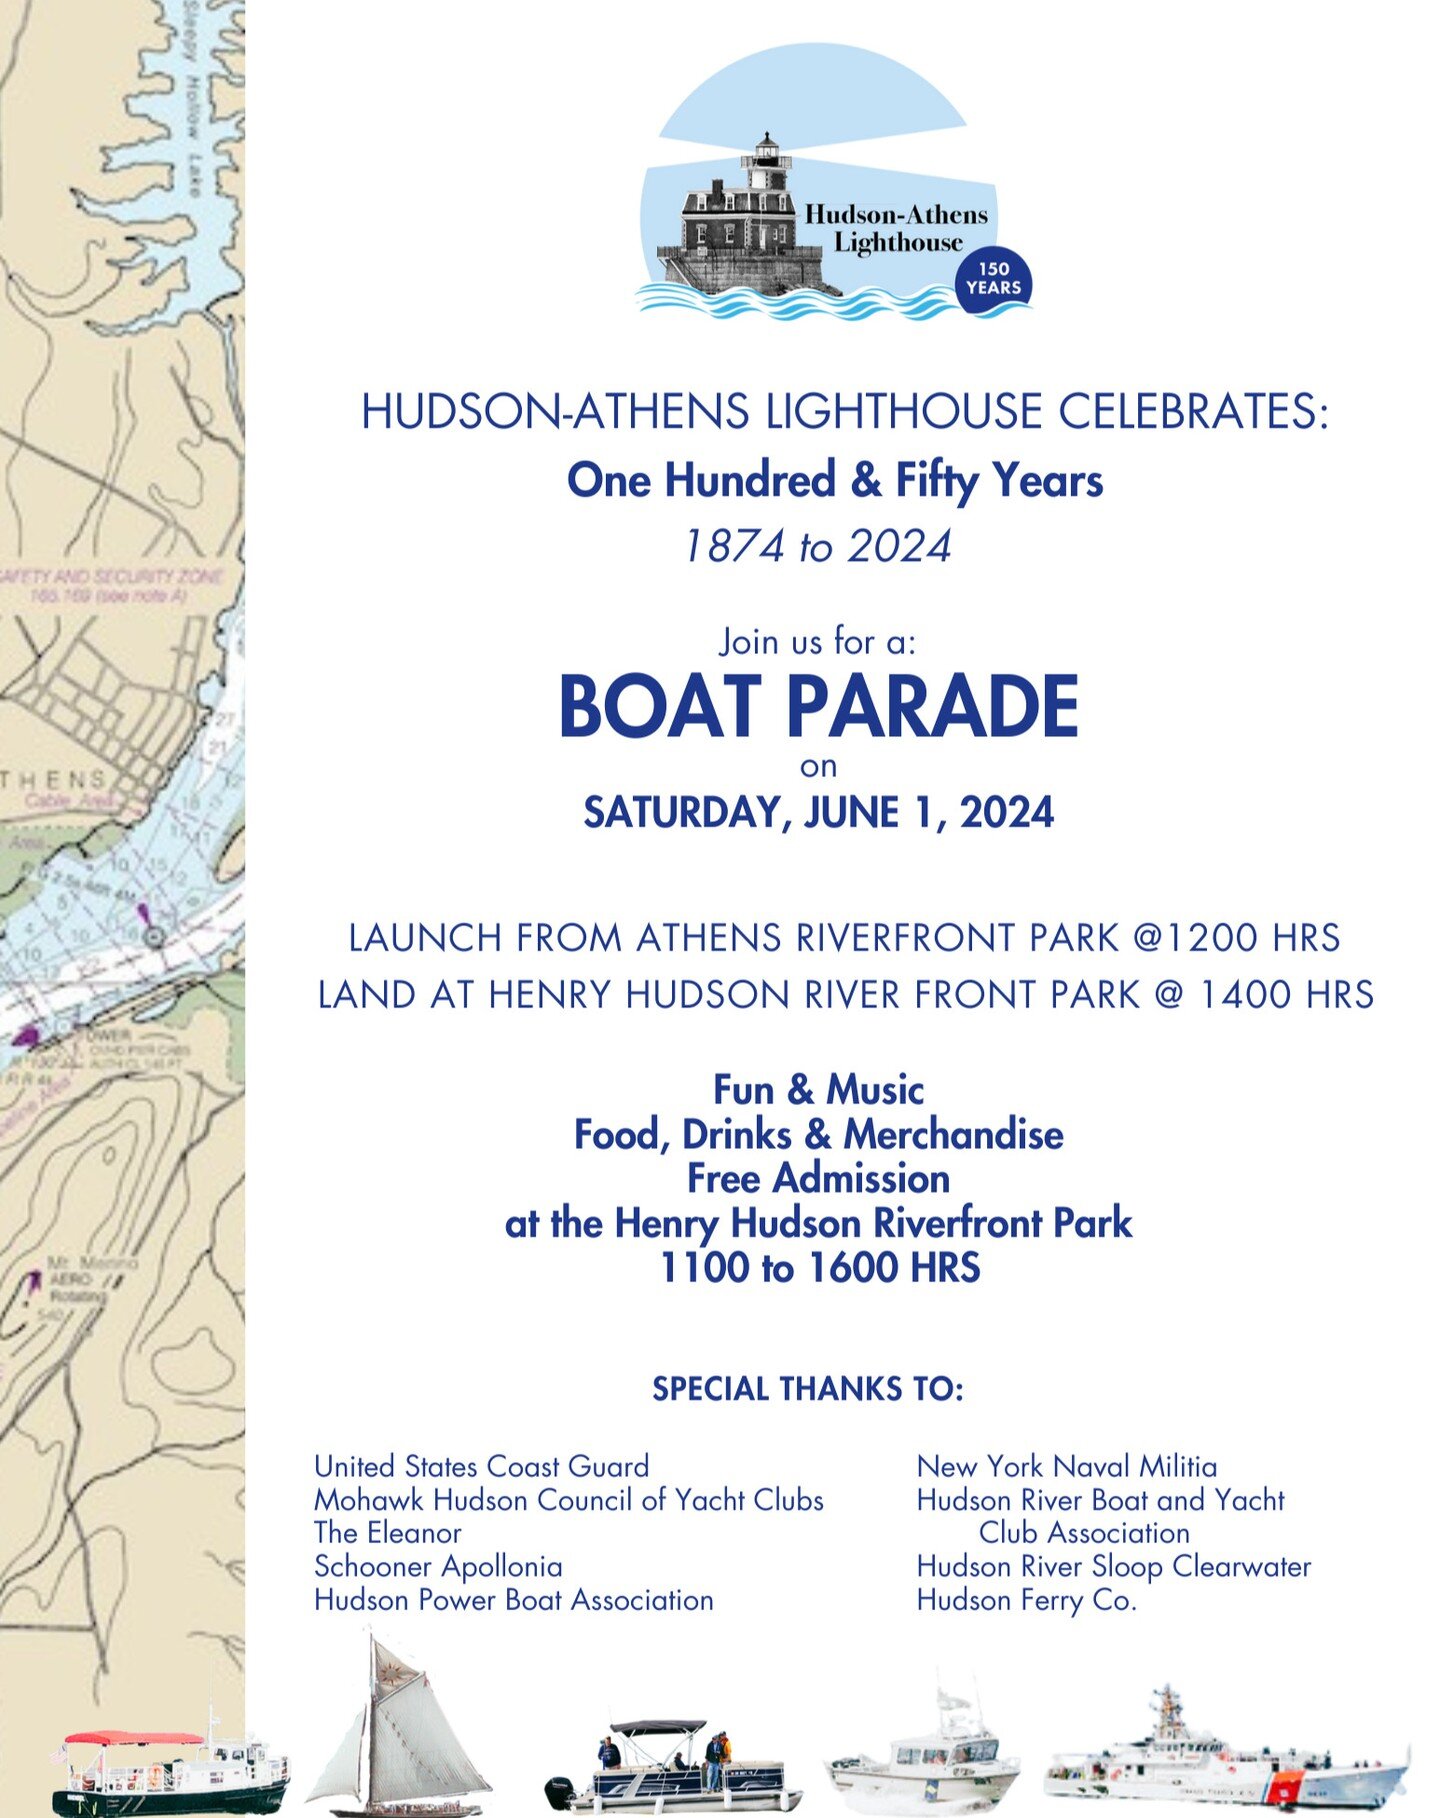 🎉 SAVE THE DATE: JUNE 1ST, SATURDAY 🎉

Join us as the Hudson-Athens Lighthouse celebrates its 150th Anniversary with a spectacular Boat Parade on the Hudson River!

The parade sets sail at 12:00 pm from Athens, led by the US Coast Guard and followe